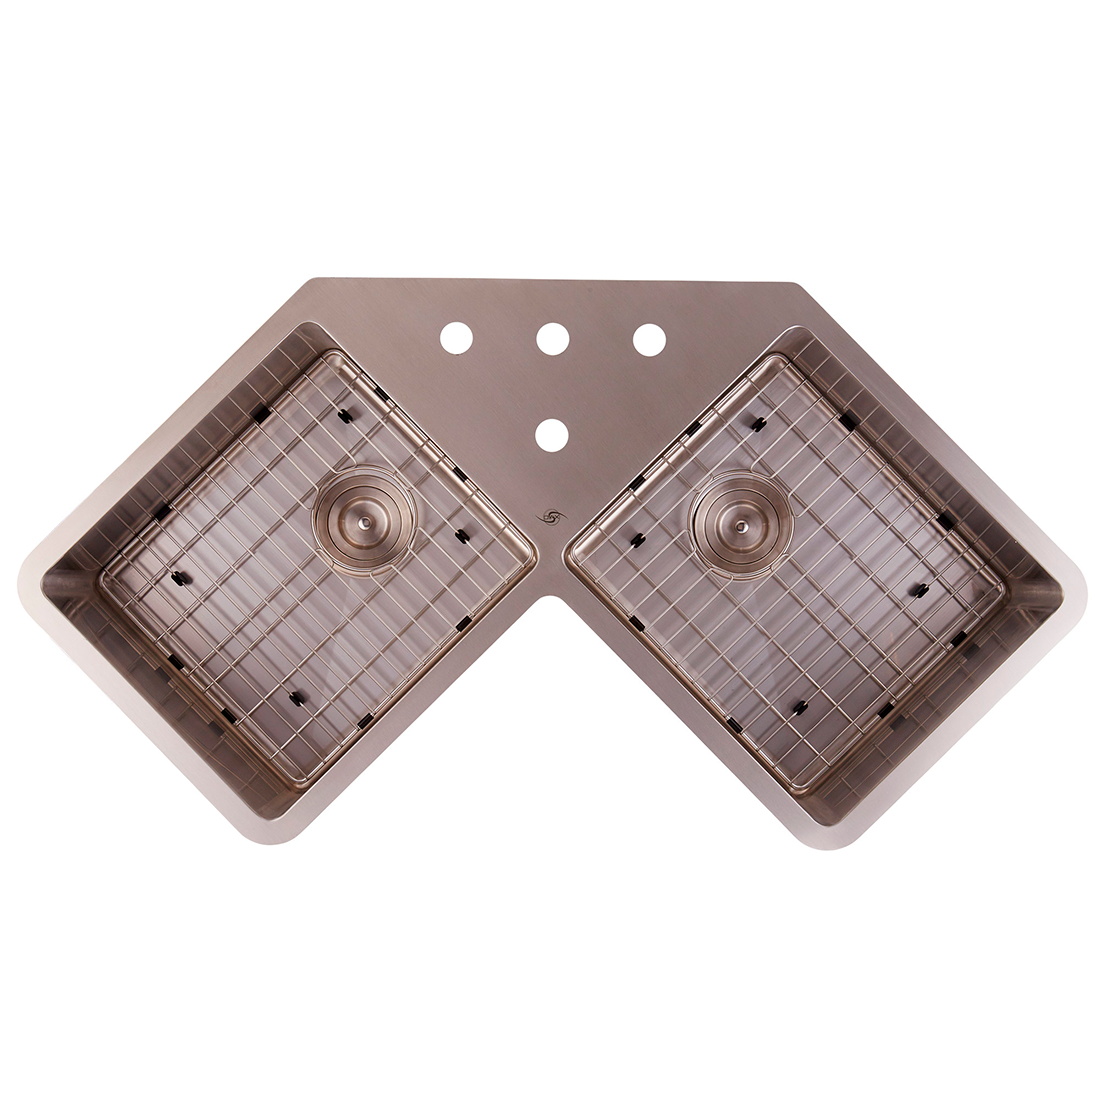 DAX Grid for Kitchen Sink, Stainless Steel Body, Chrome Finish, Compatible with DAX-334, (GRID-334)